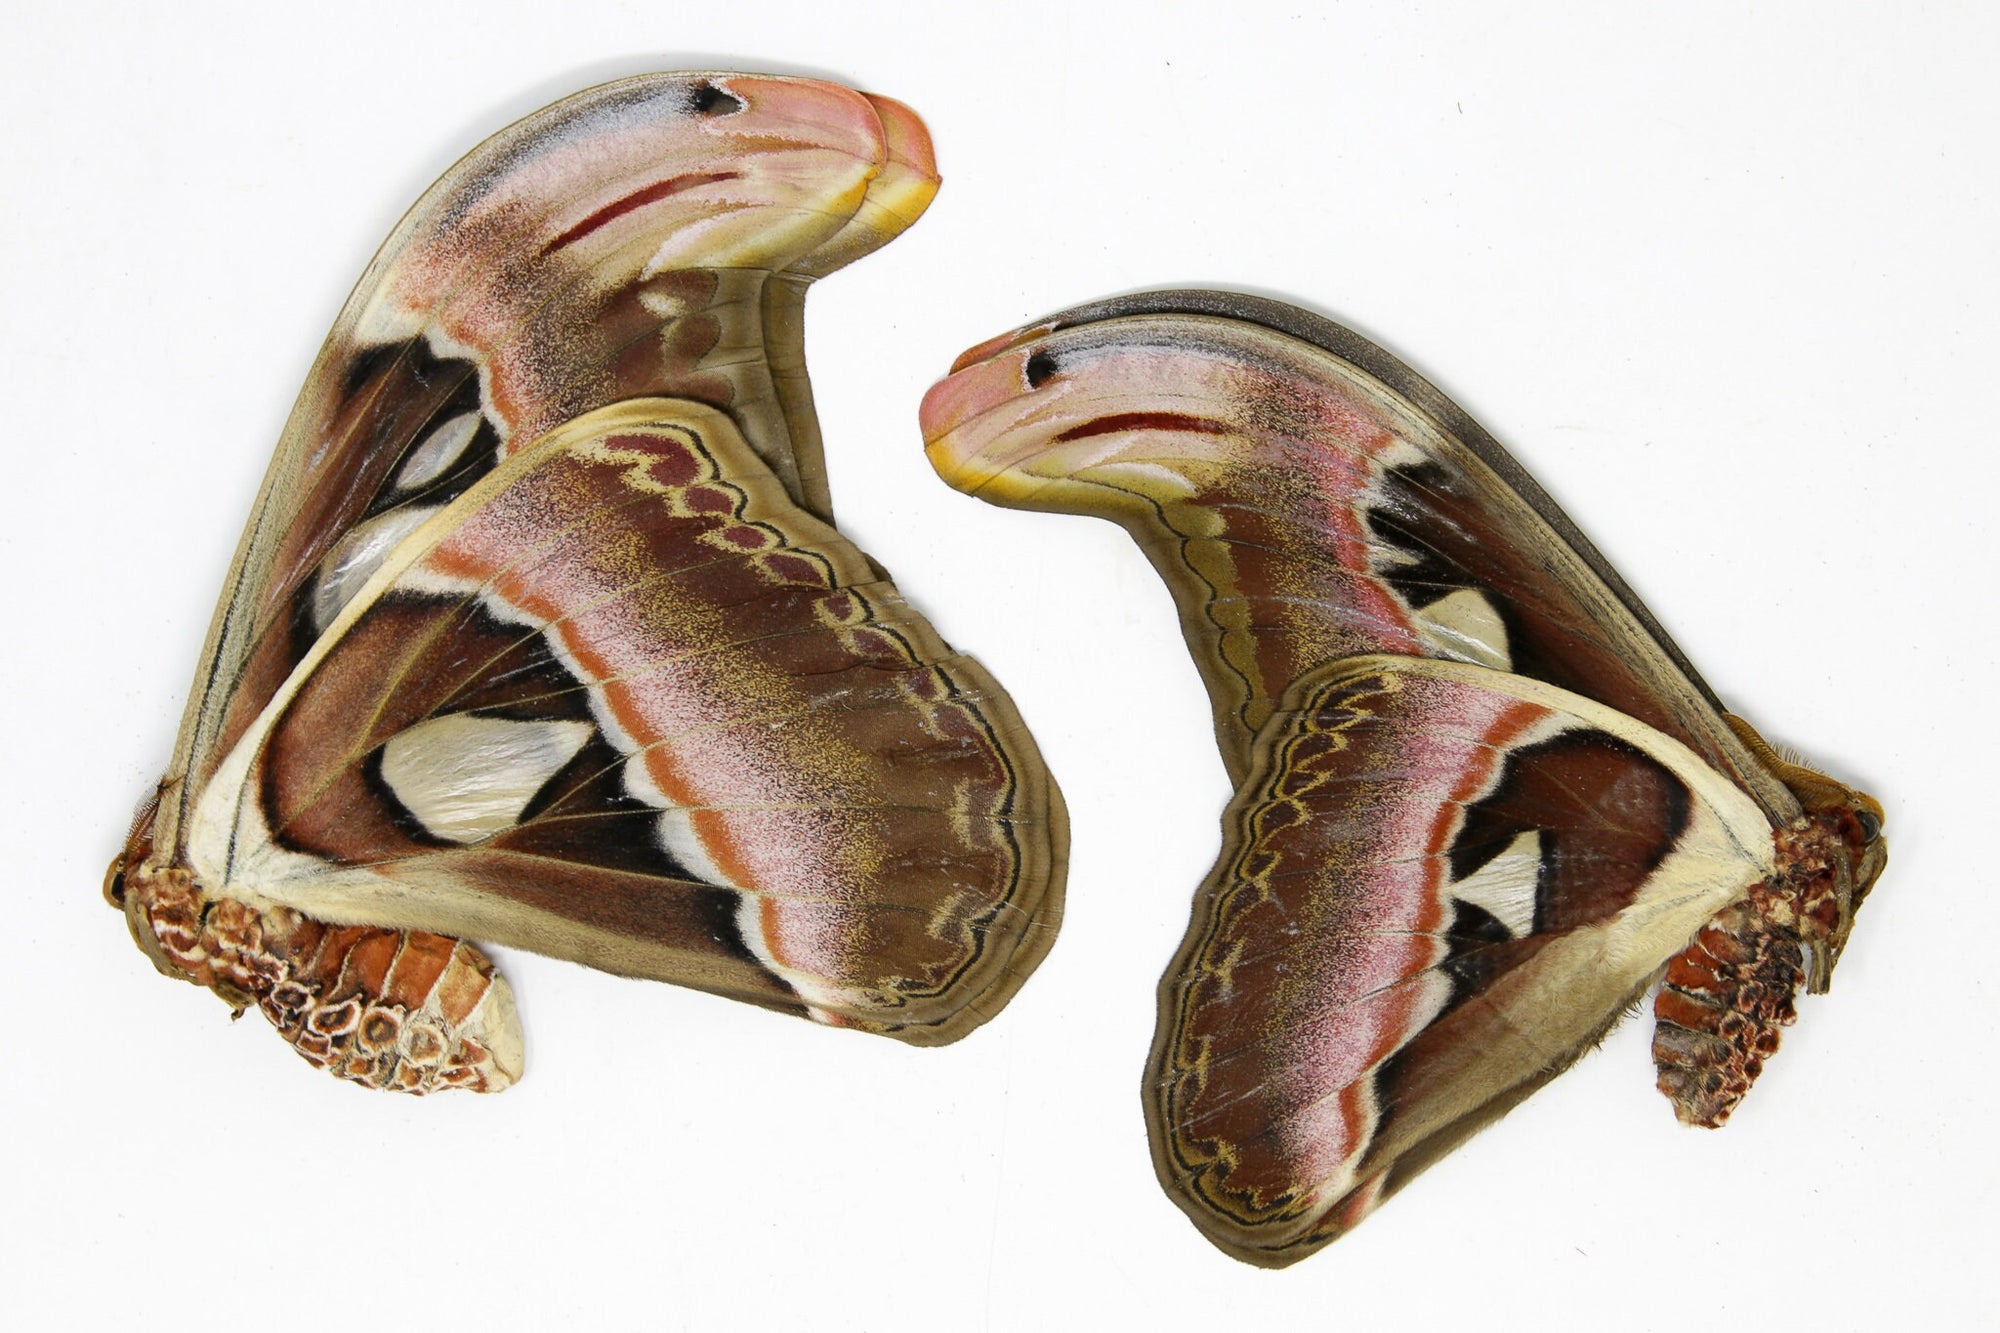 TWO (2) Giant Atlas Moths, Attacus atlas, Real Unmounted Specimens A1 Entomology